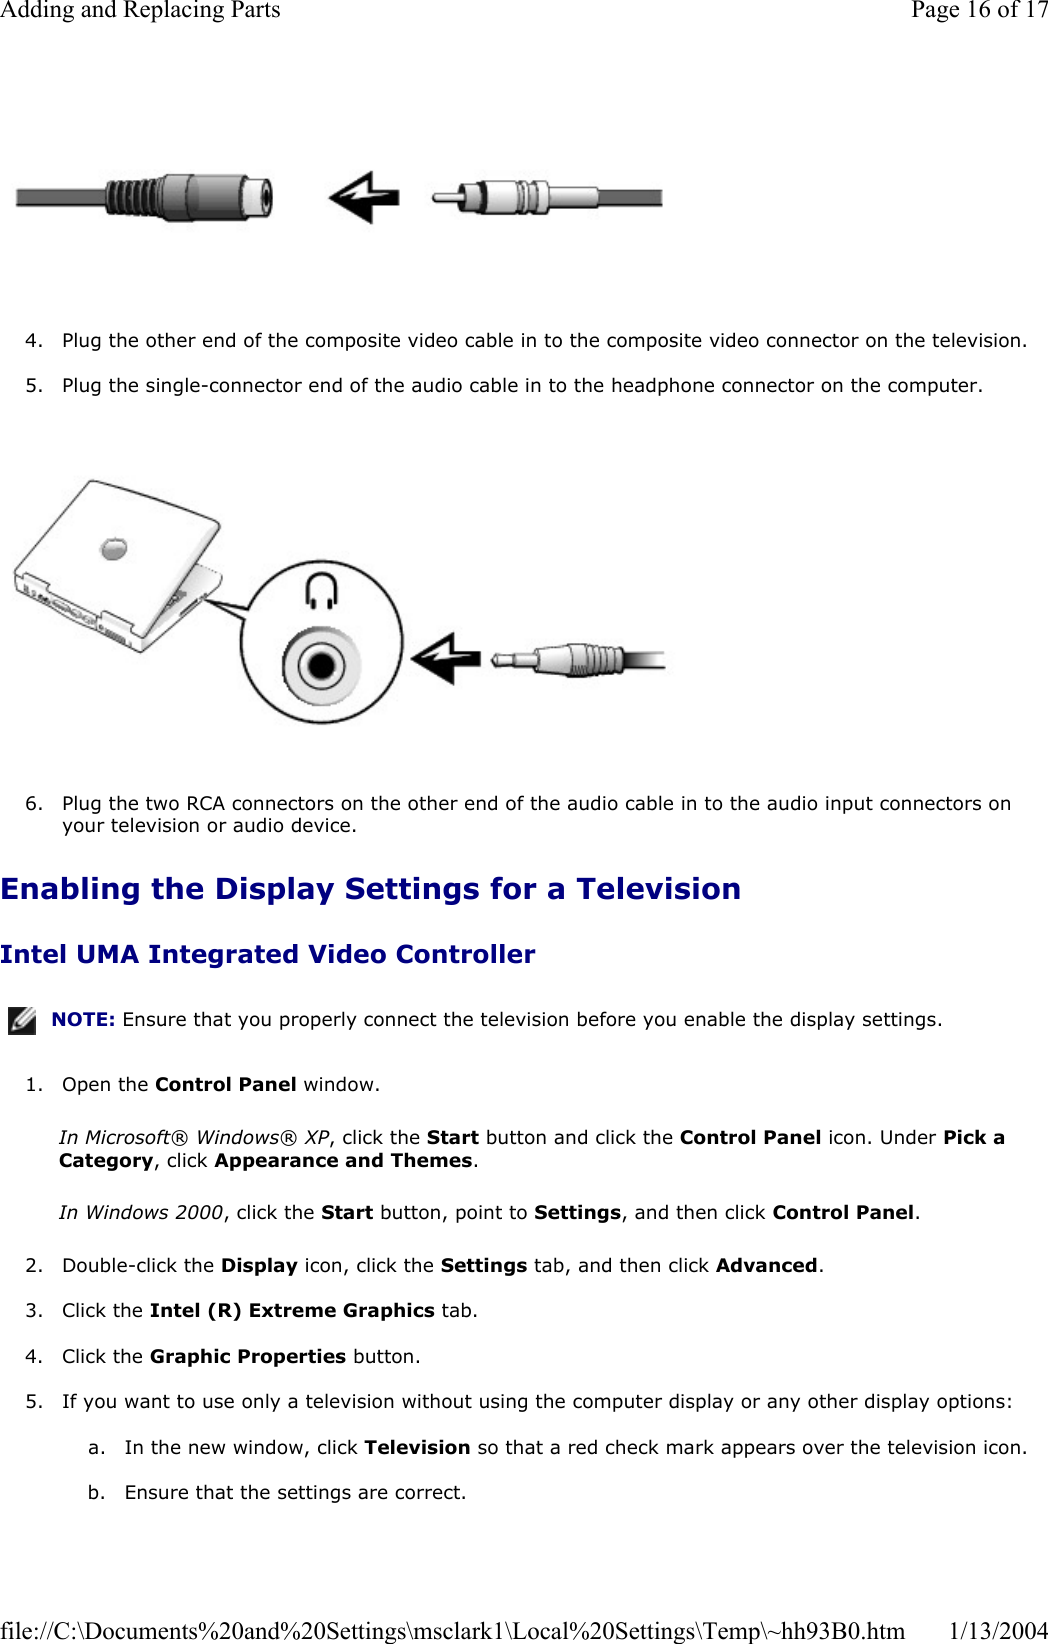 4. Plug the other end of the composite video cable in to the composite video connector on the television. 5. Plug the single-connector end of the audio cable in to the headphone connector on the computer.  6. Plug the two RCA connectors on the other end of the audio cable in to the audio input connectors on your television or audio device. Enabling the Display Settings for a Television Intel UMA Integrated Video Controller 1. Open the Control Panel window. In Microsoft® Windows® XP, click the Start button and click the Control Panel icon. Under Pick a Category, click Appearance and Themes.In Windows 2000, click the Start button, point to Settings, and then click Control Panel.2. Double-click the Display icon, click the Settings tab, and then click Advanced.3. Click the Intel (R) Extreme Graphics tab. 4. Click the Graphic Properties button. 5. If you want to use only a television without using the computer display or any other display options: a. In the new window, click Television so that a red check mark appears over the television icon.  b. Ensure that the settings are correct. NOTE: Ensure that you properly connect the television before you enable the display settings.Page 16 of 17Adding and Replacing Parts1/13/2004file://C:\Documents%20and%20Settings\msclark1\Local%20Settings\Temp\~hh93B0.htm